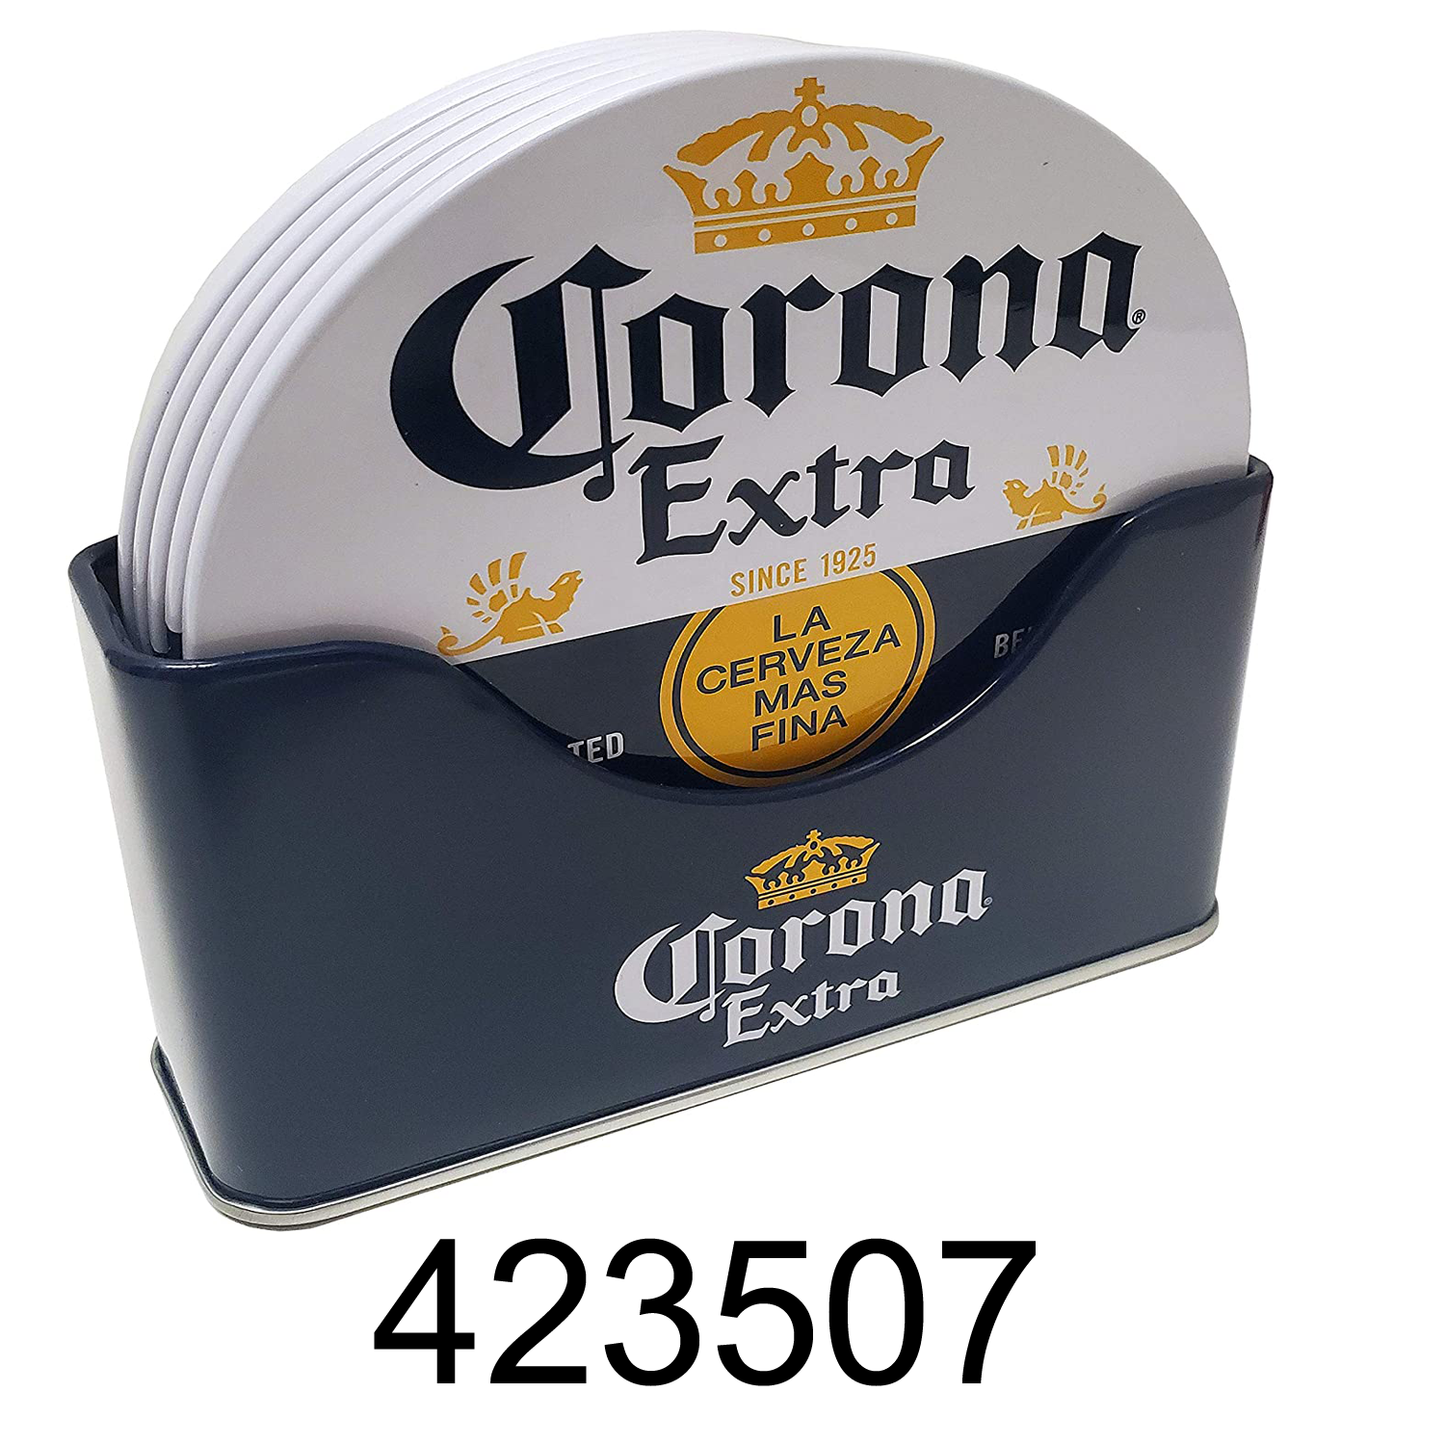 6 PC Corona Coaster With Standing Metal Holder